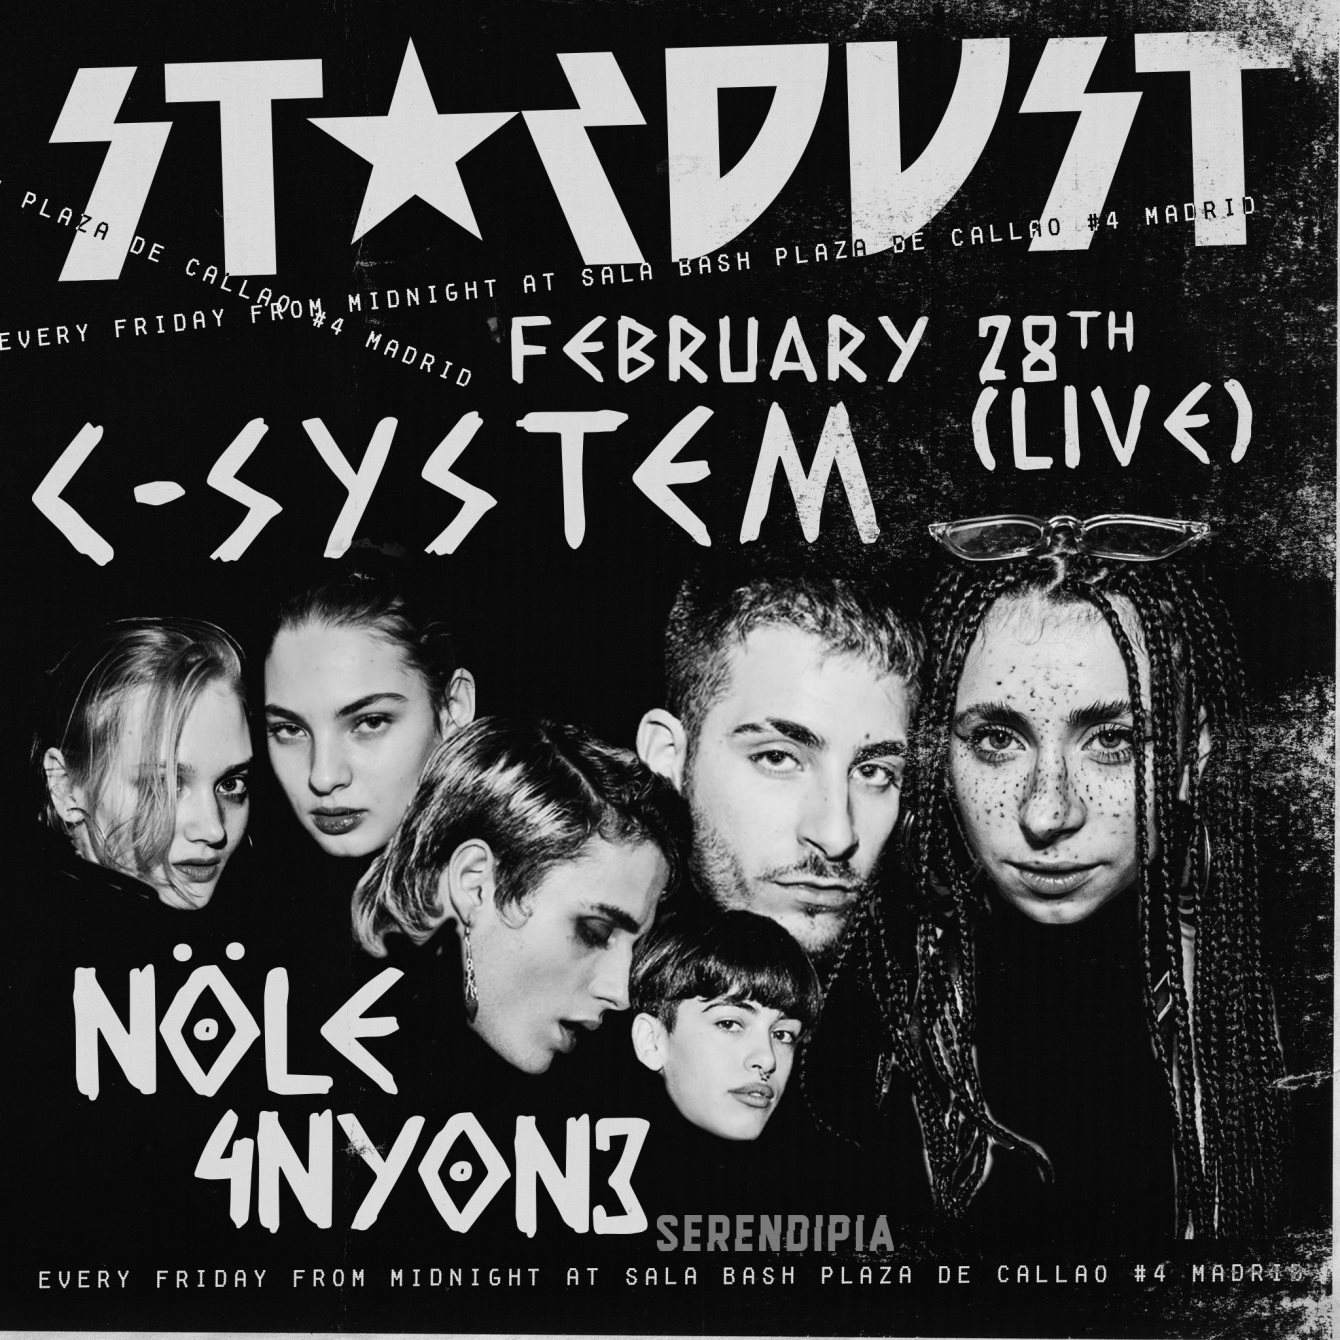 Stardust 'in Exile' Invites: C-System (Live), Nöle, 4ny0n3 - フライヤー裏